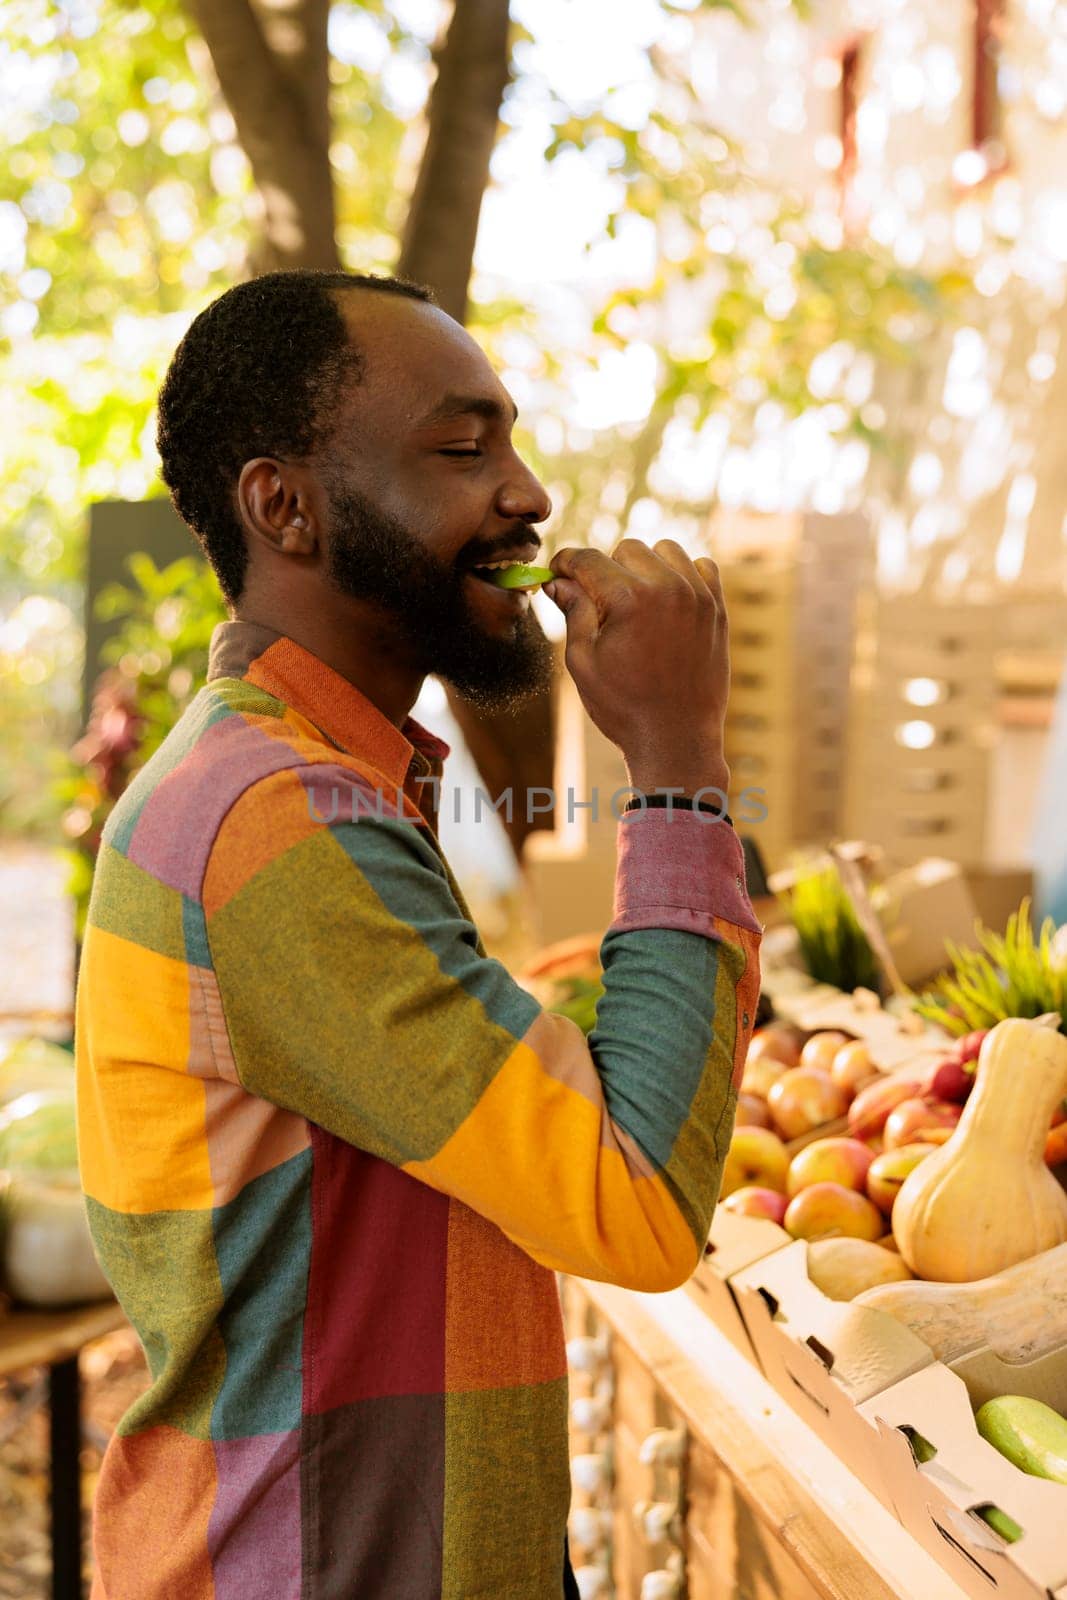 Portrait of smiling male individual tasting apple before buying bio produce, shopping for natural organic products at farmers market. Young black man enjoying food tasting fresh local produce.